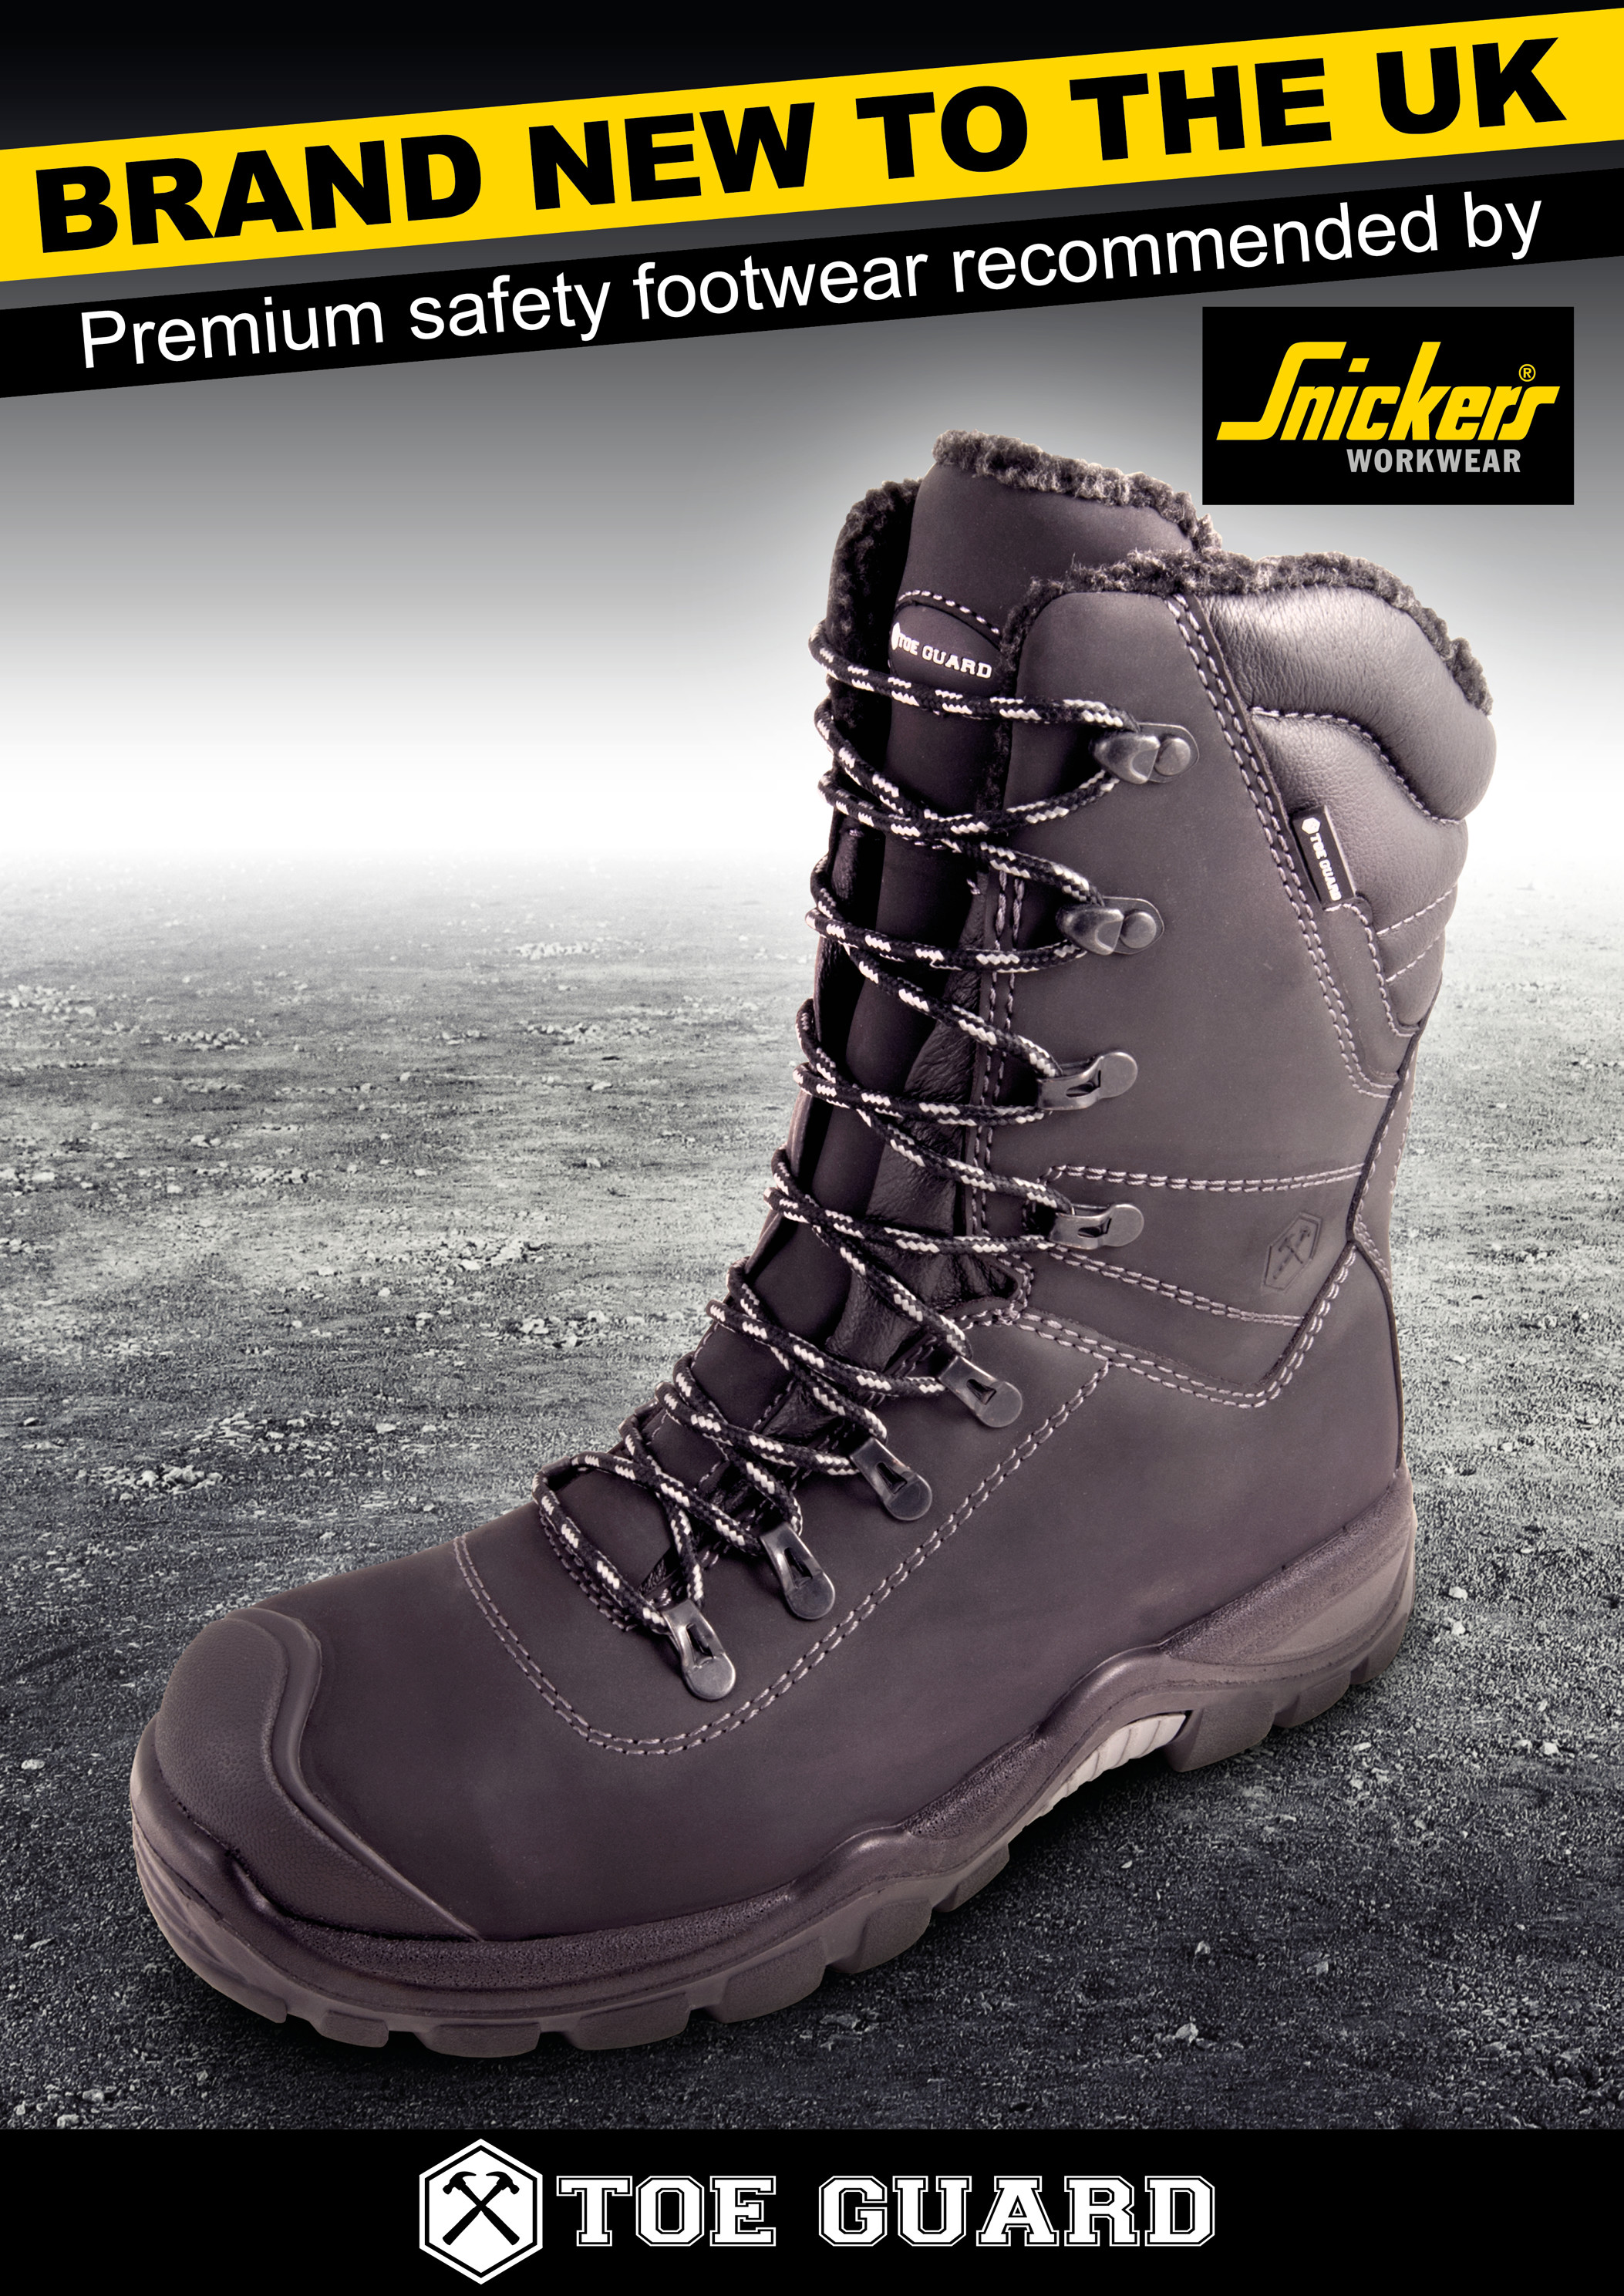 Snickers Workwear Recommends Toe Guard Safety Footwear - Locksmith Journal